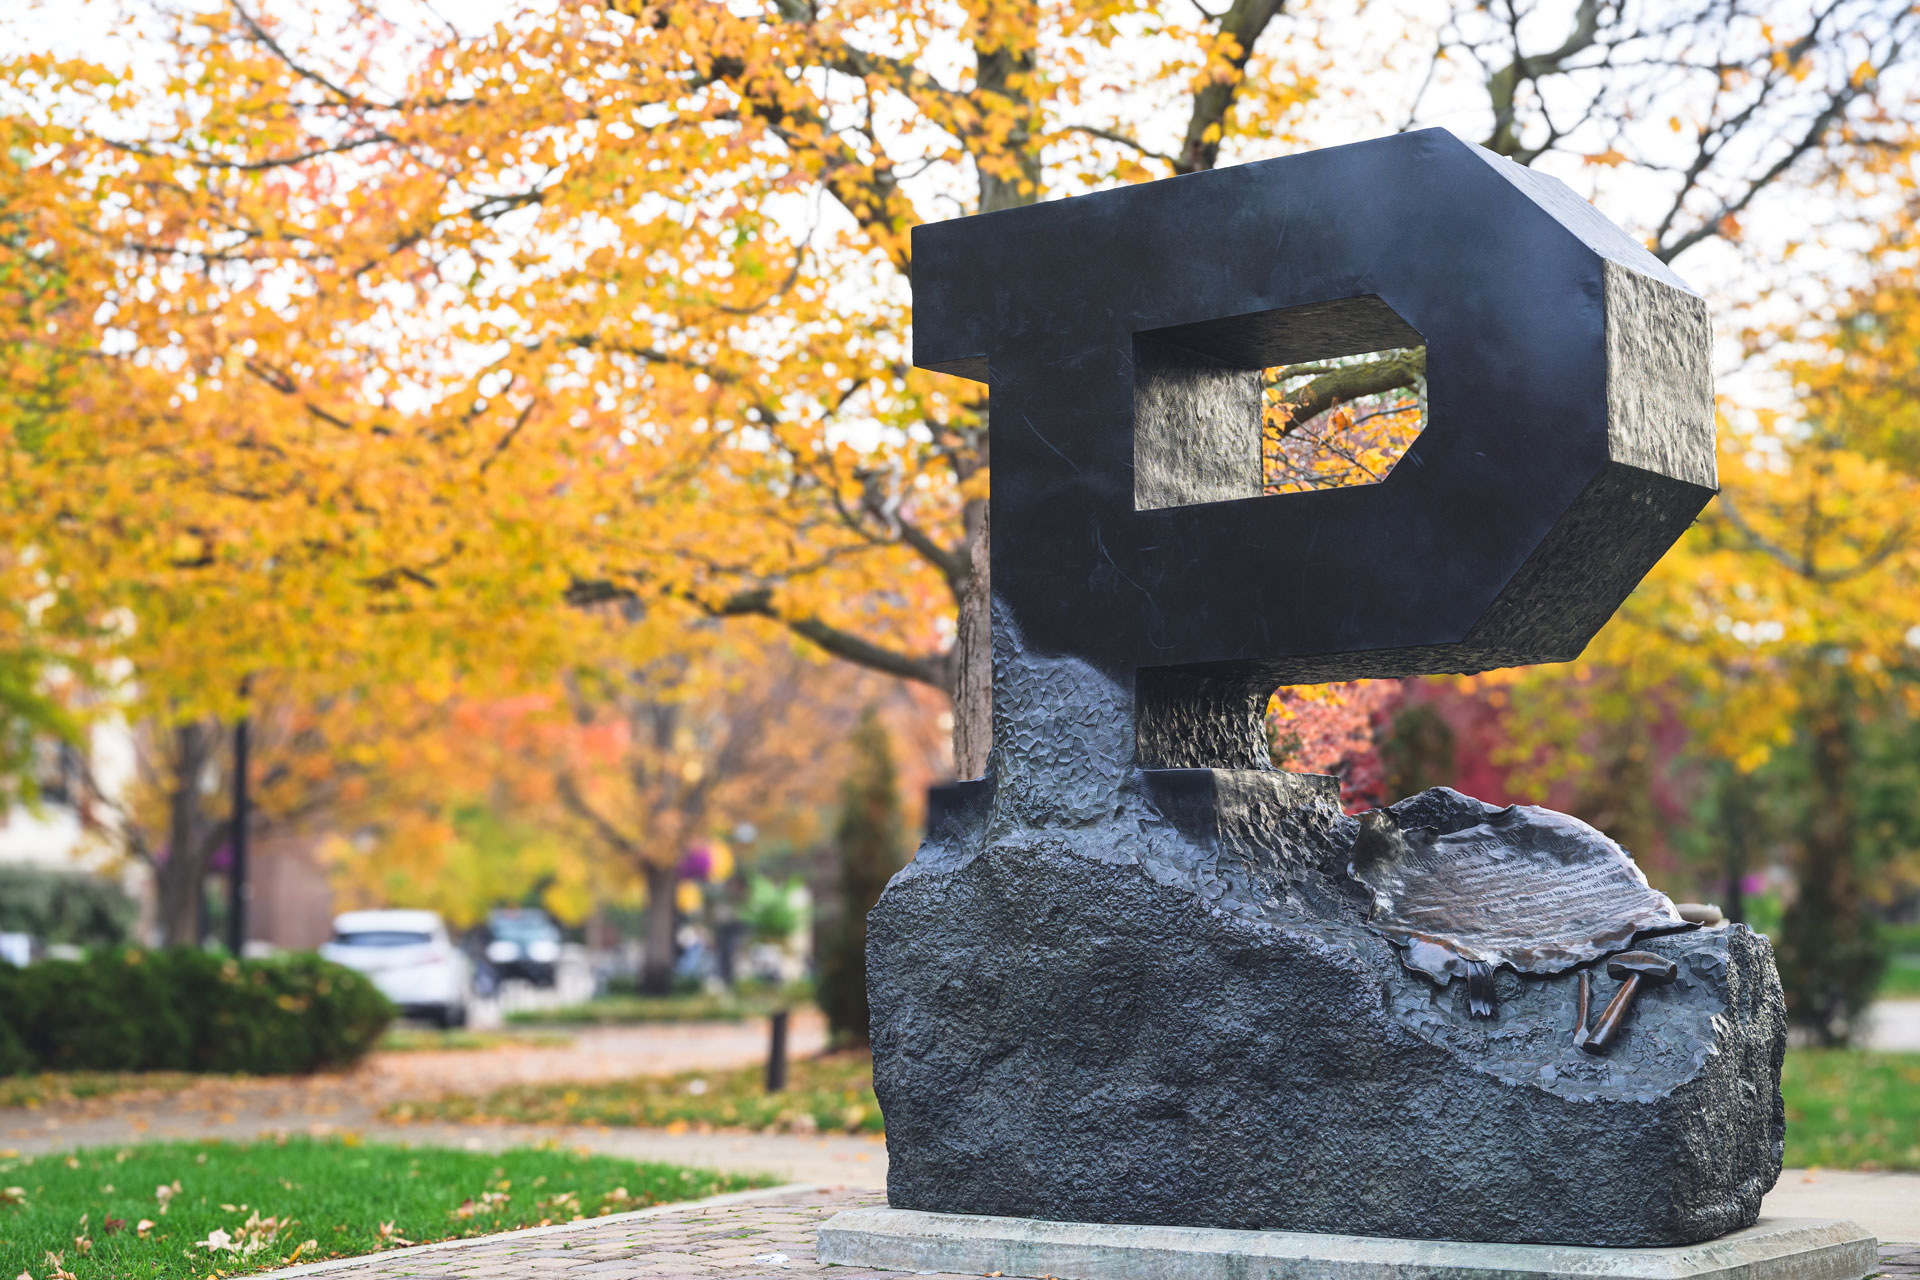 A "P" statue for Purdue University is seen in the foreground with yellow trees in the background.